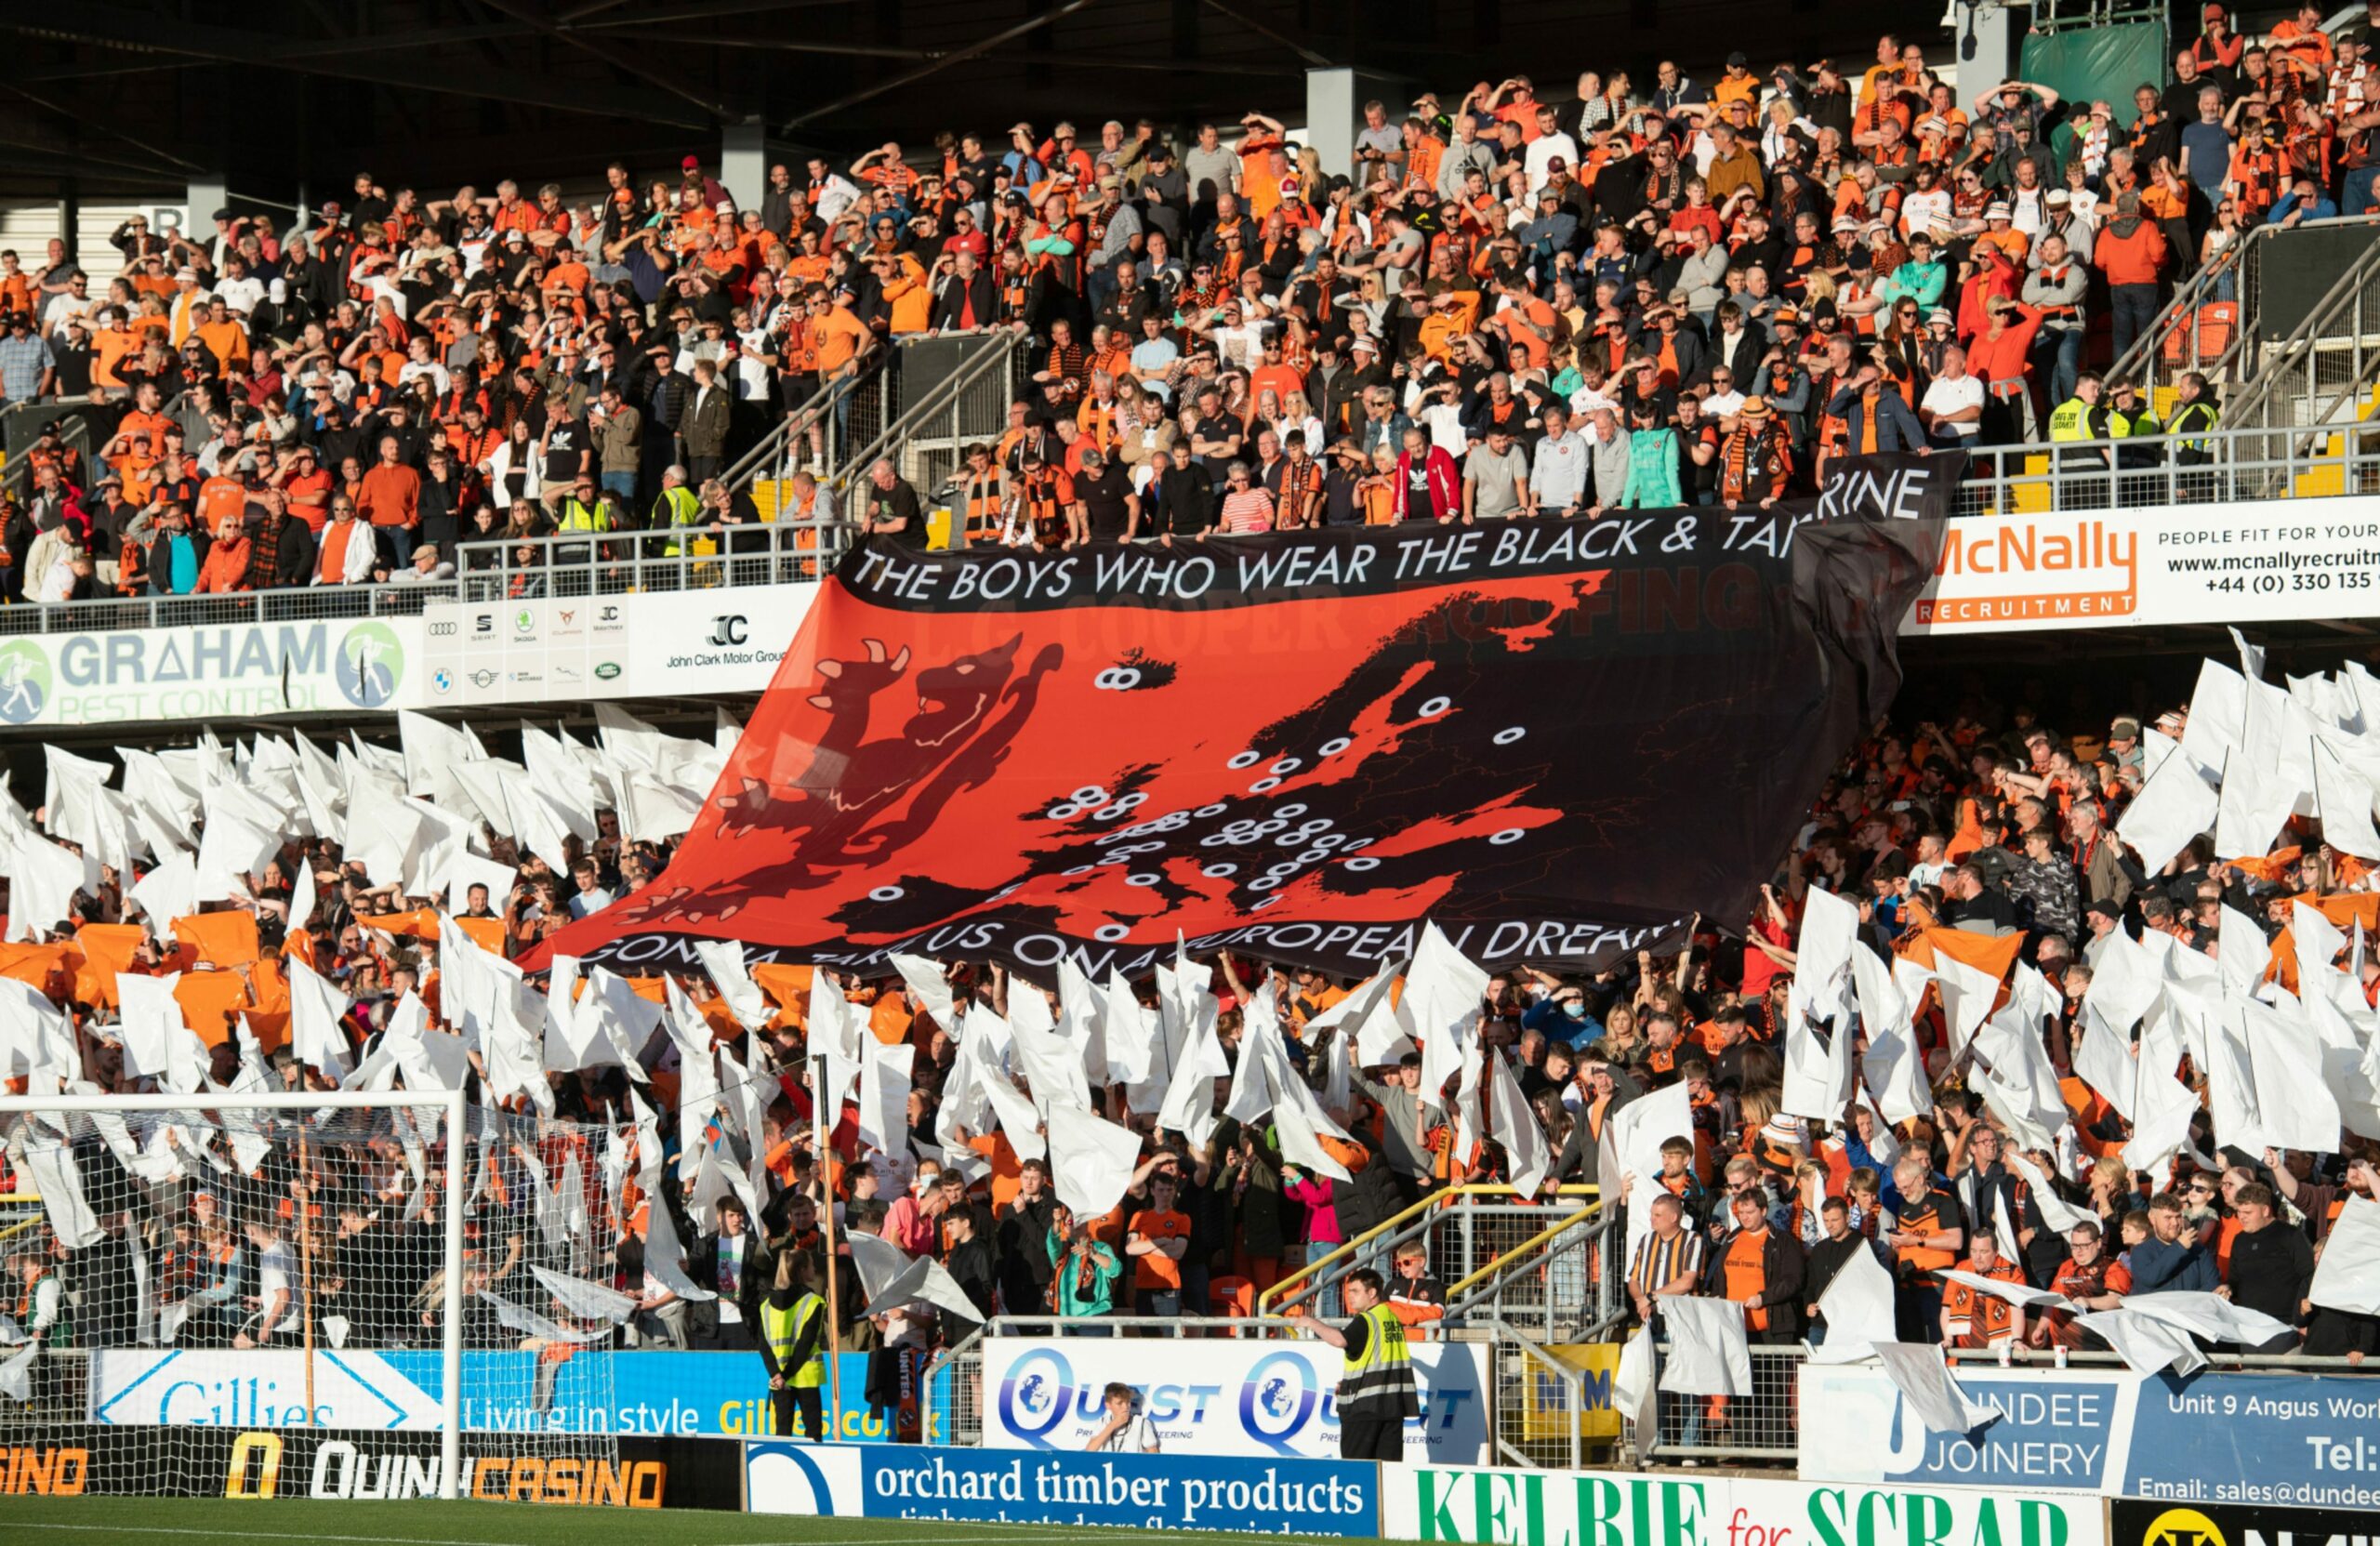 The Dundee United display team unfurled eye-catching flags, like this one in the Eddie Thomson Stand.